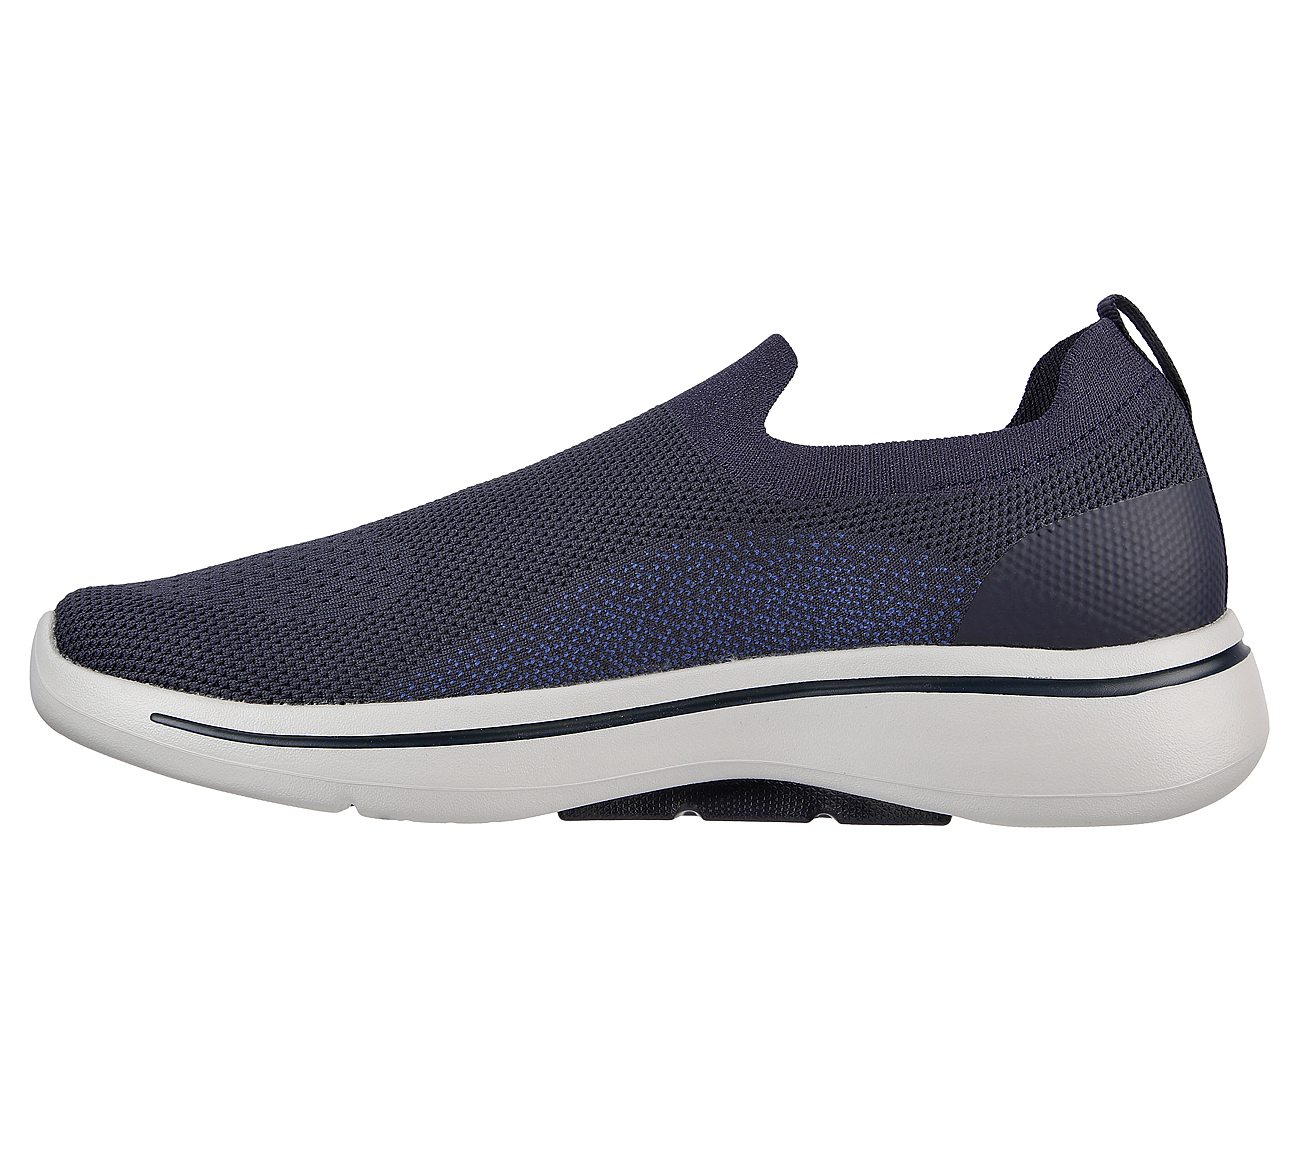 Skechers Navy Go Walk Arch Fit Seltos Mens Slip On Shoes Style ID ...